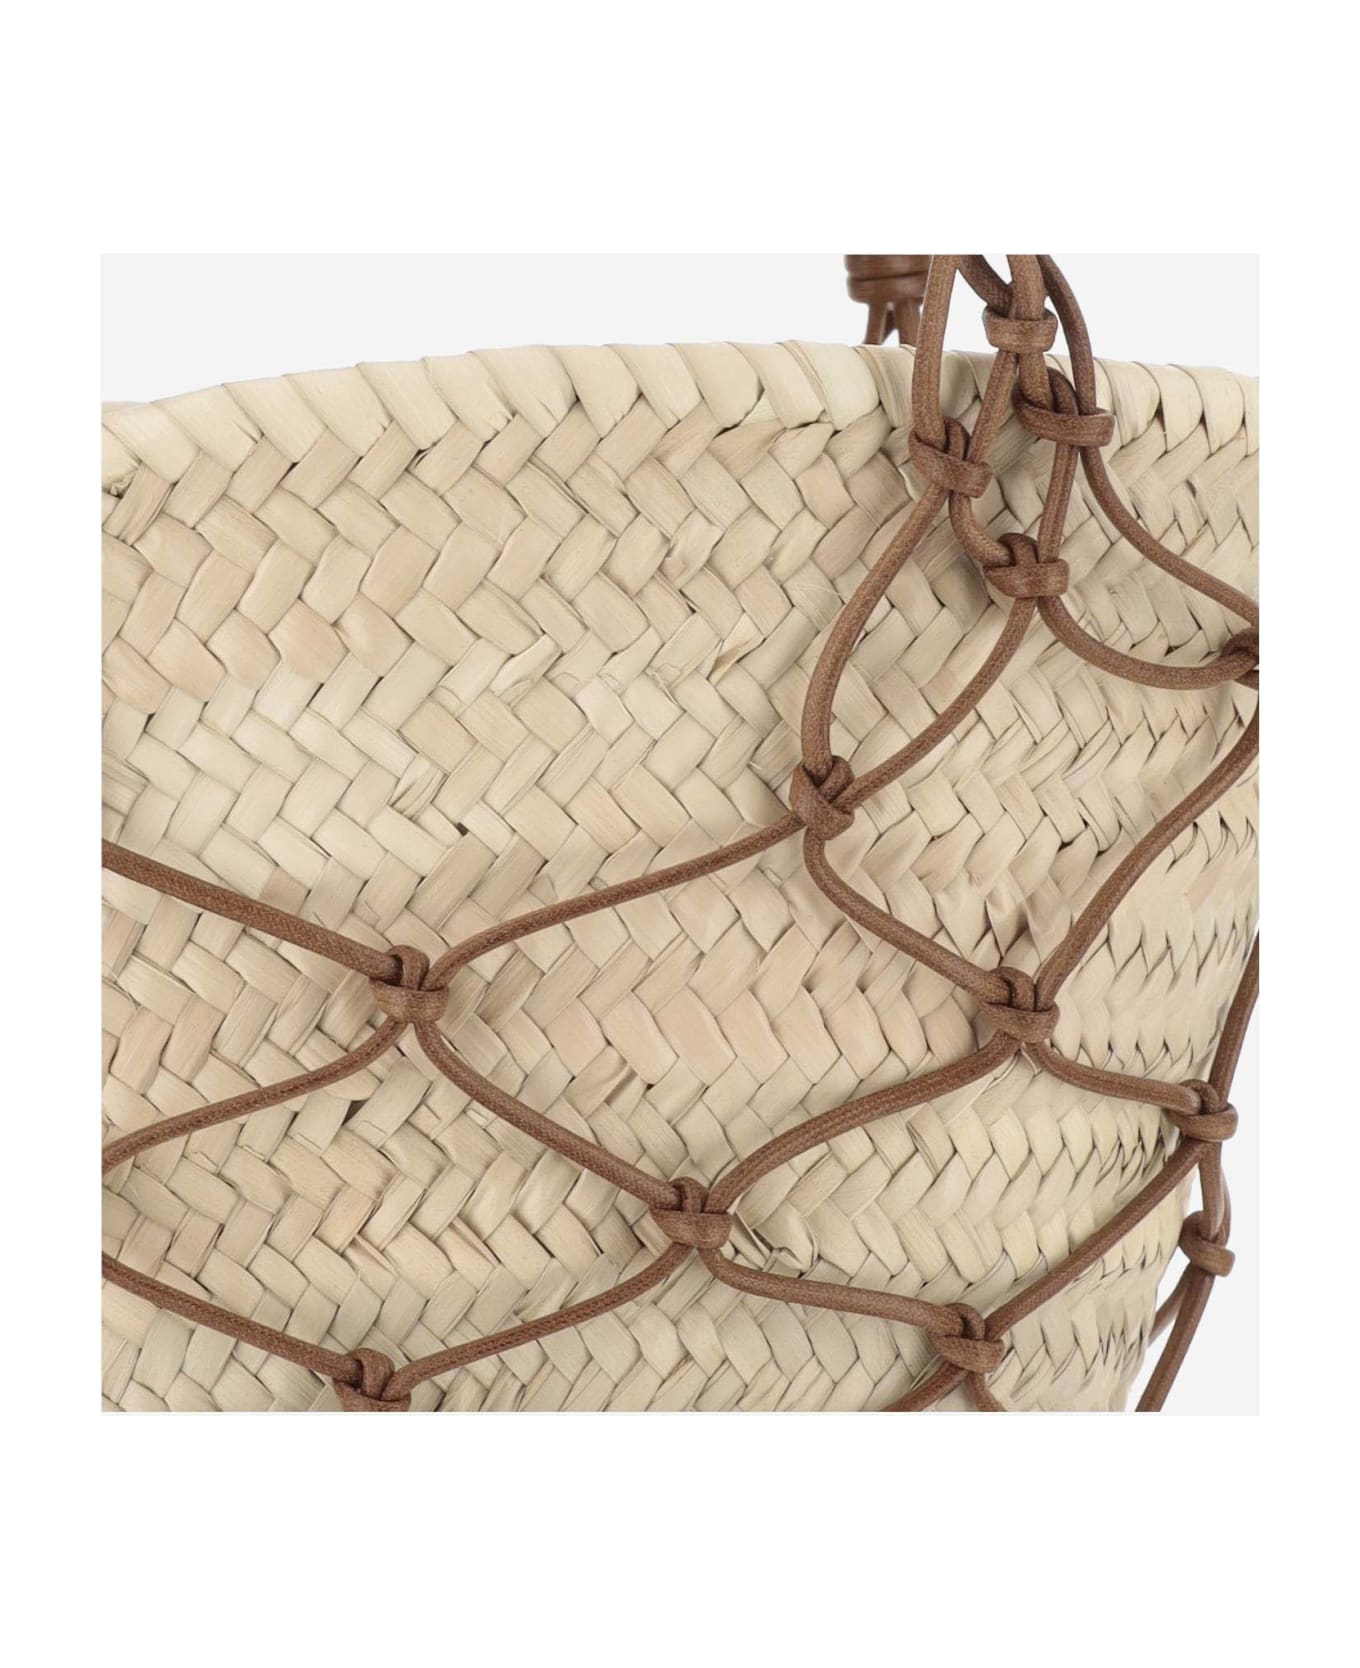 Filippo Catarzi Straw And Cotton Bag With Leather Details - Beige